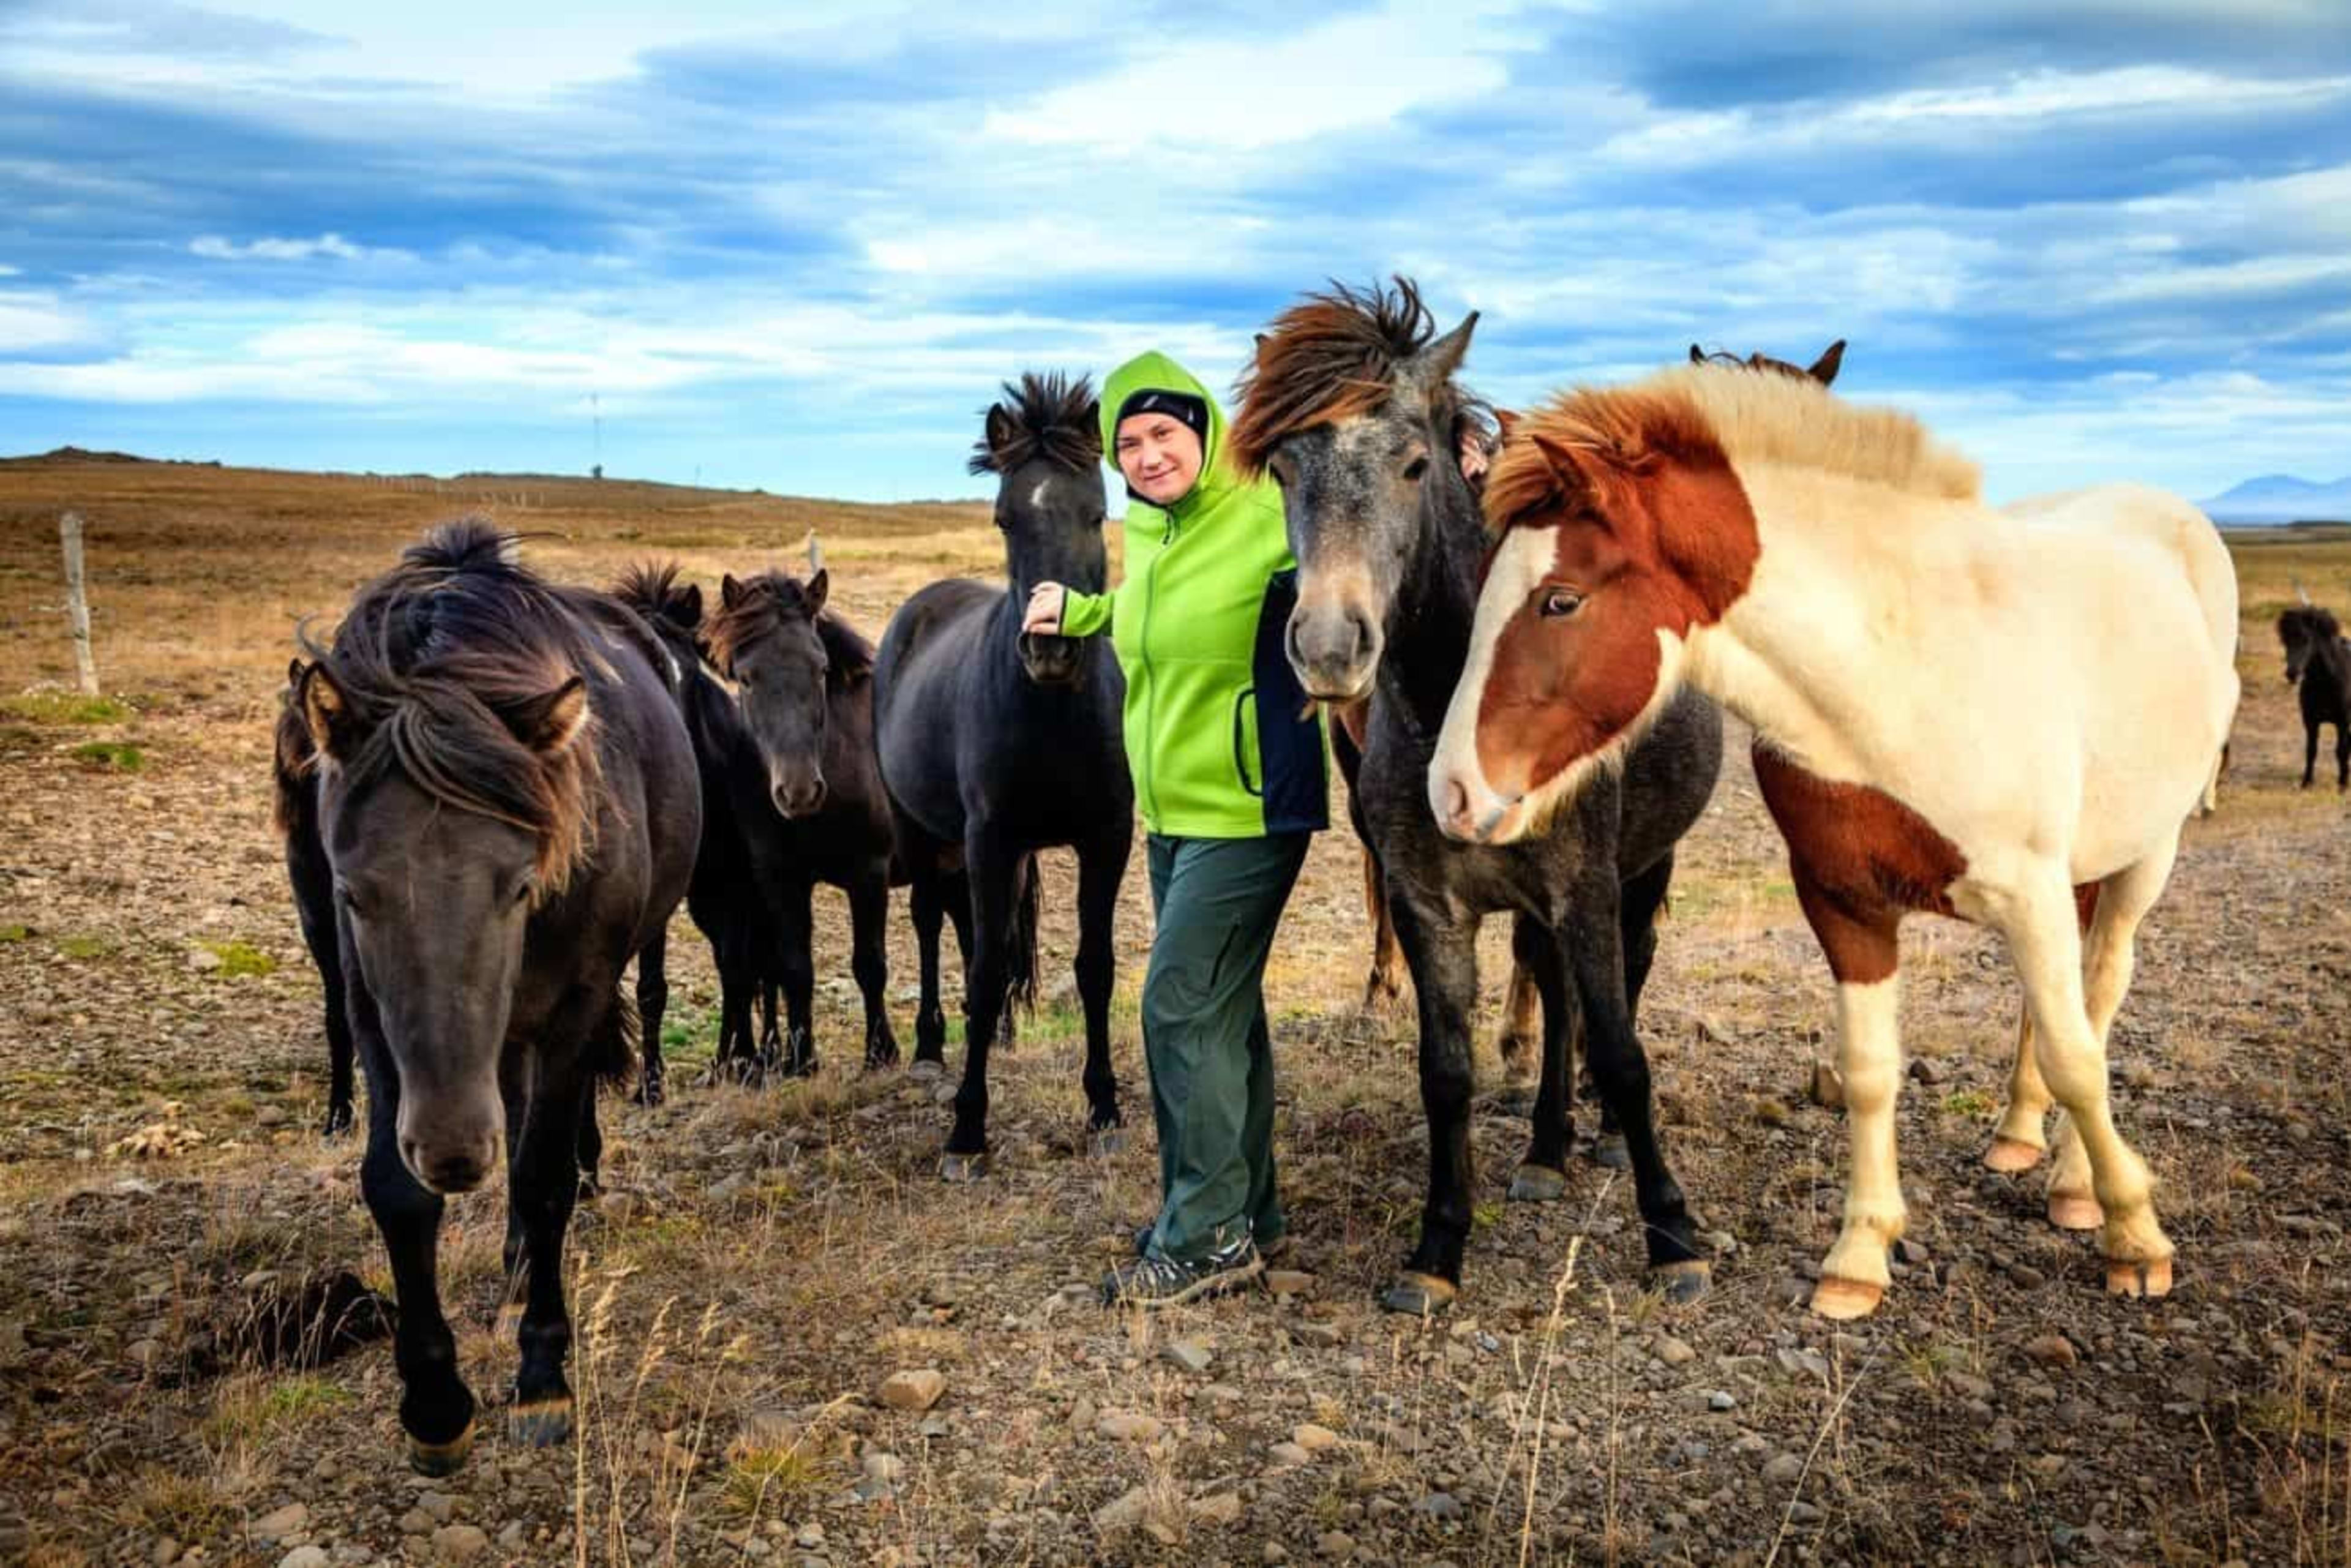  A tourist posing with Icelandic horses